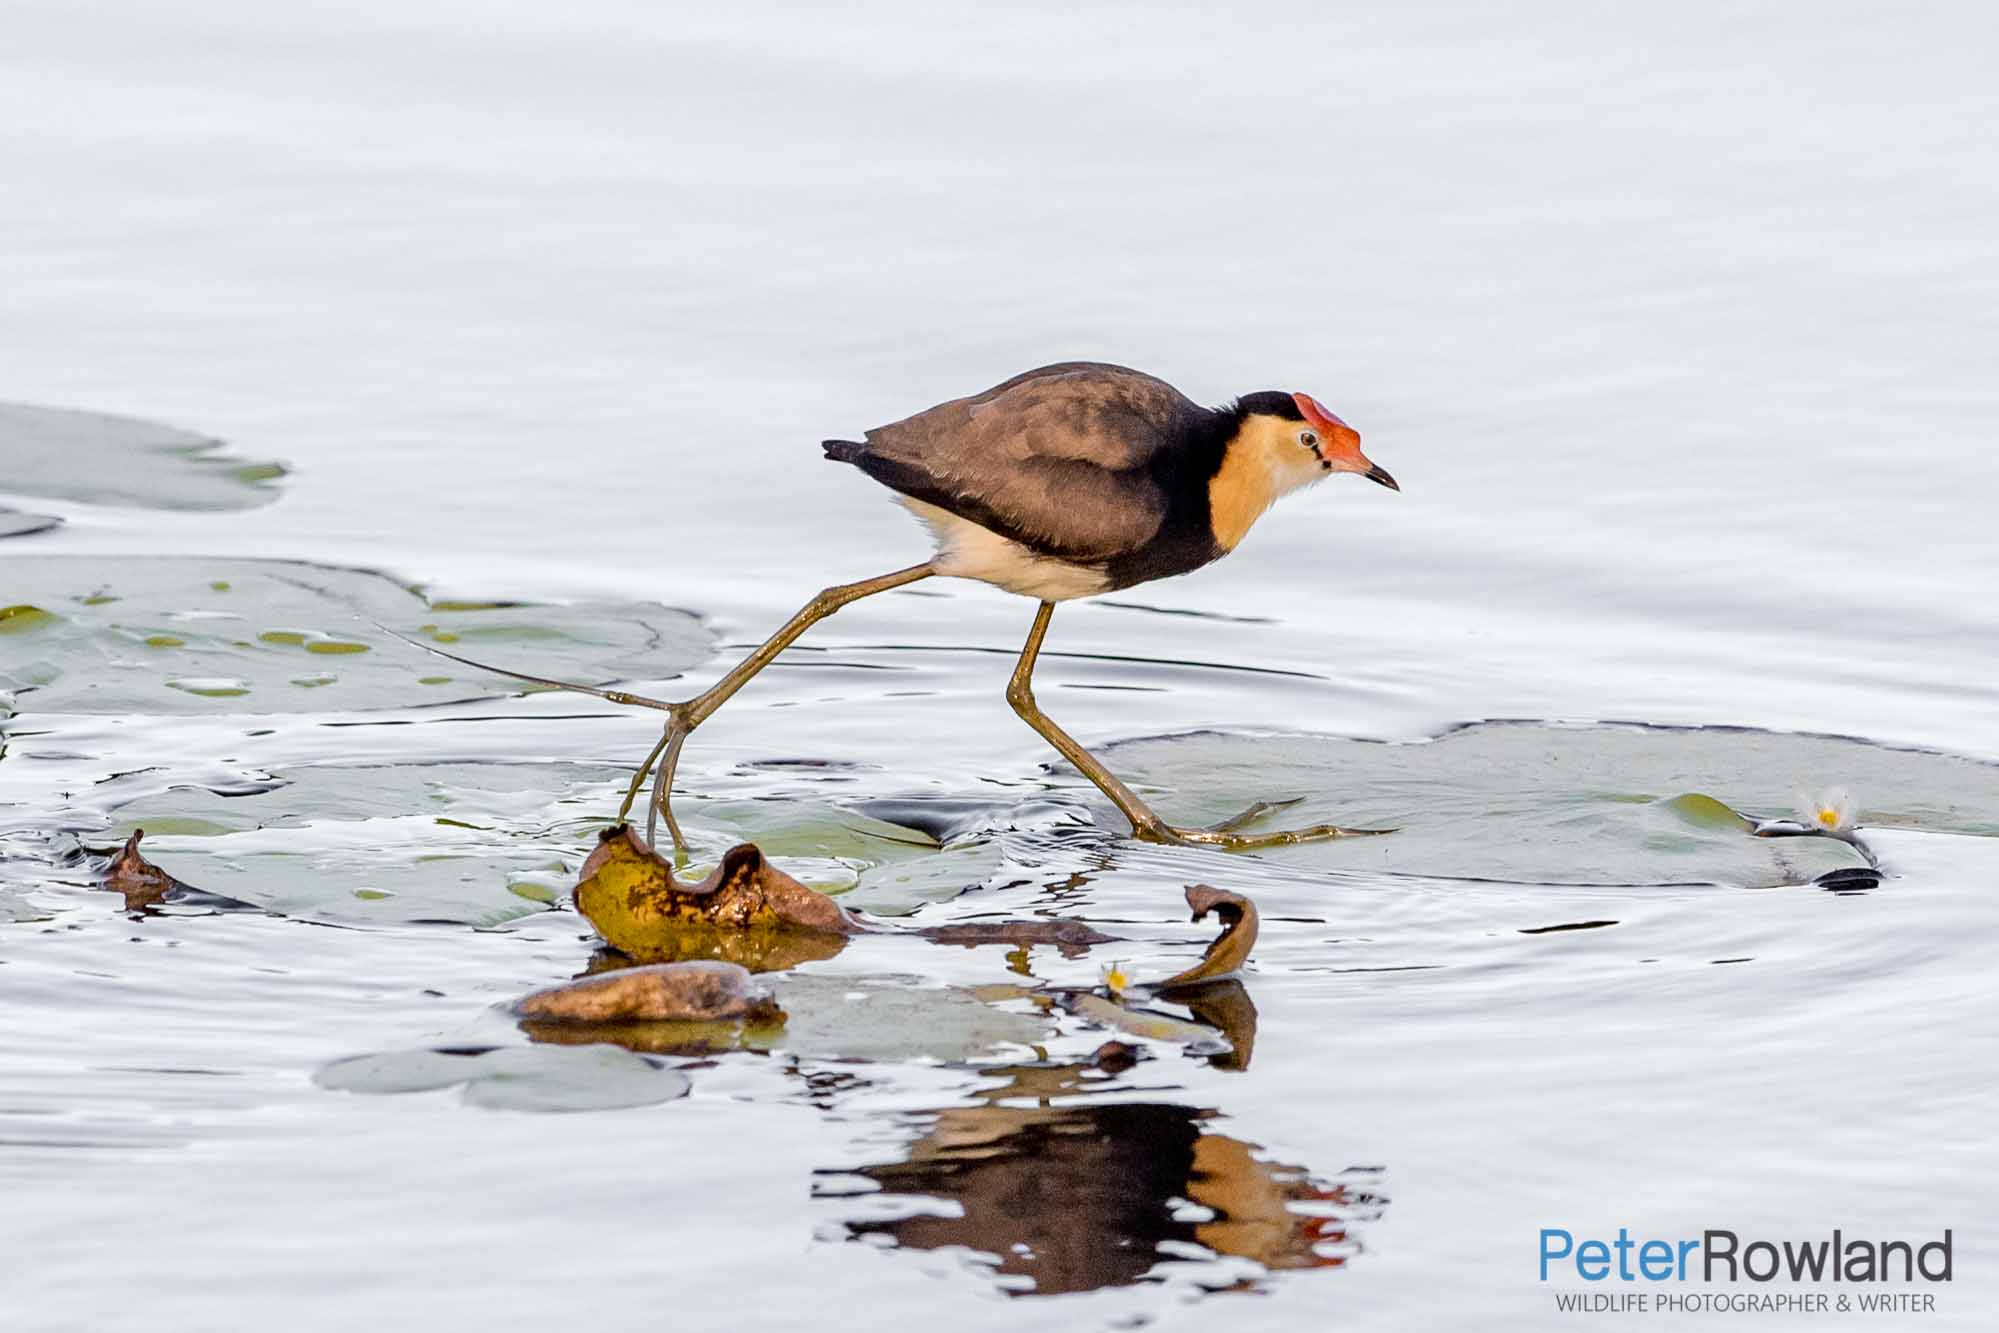 A Comb-crested Jacana walking on lily pads